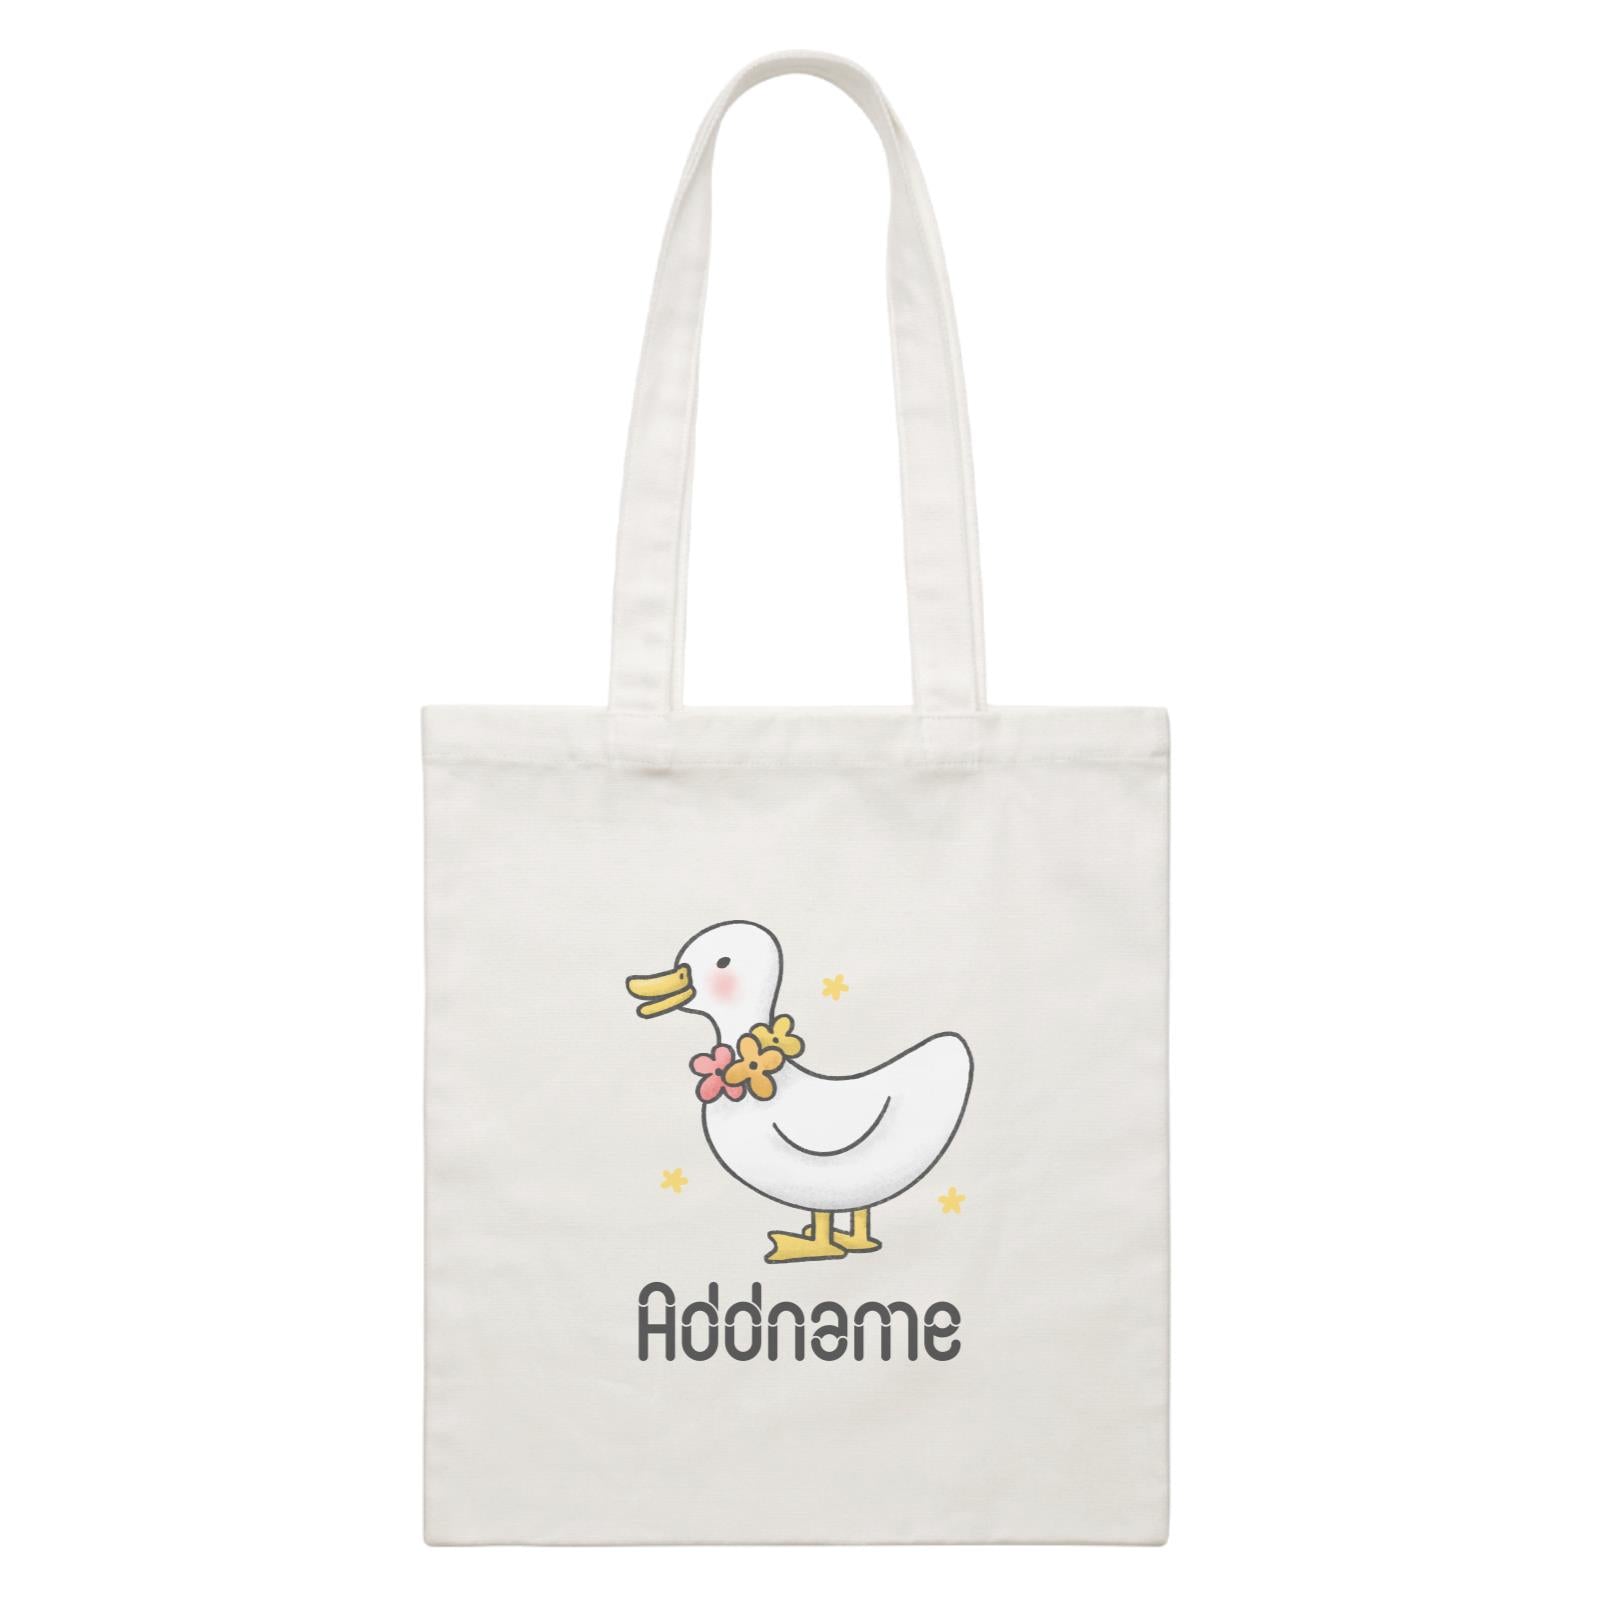 Cute Hand Drawn Style Duck Addname White Canvas Bag